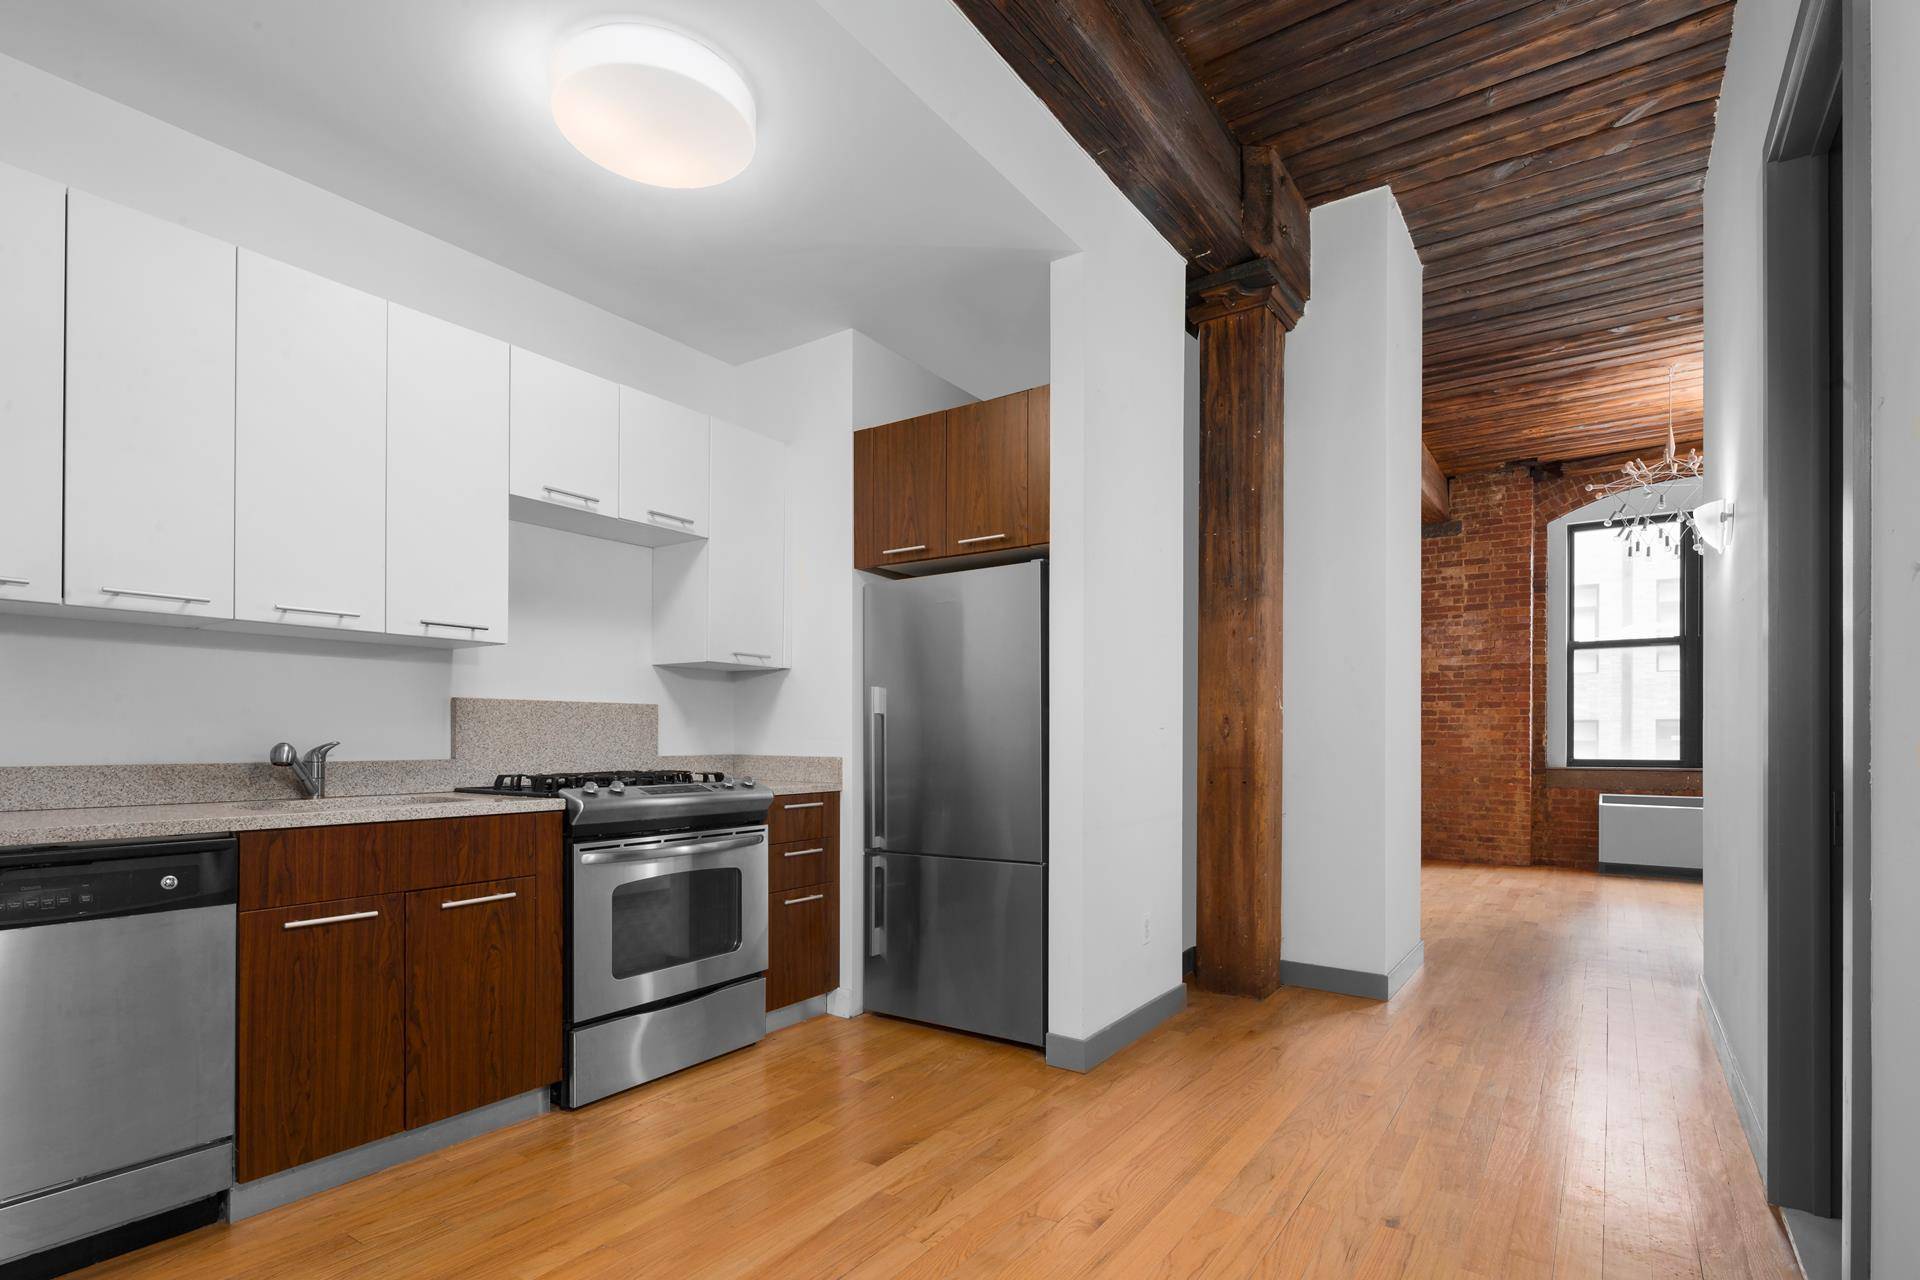 Rent Stabilized ! ! ! Upon entering this spacious studio at the Wythe Confectionery, you are immediately captivated by the original exposed brick along with the restored wooden ceilings and ...